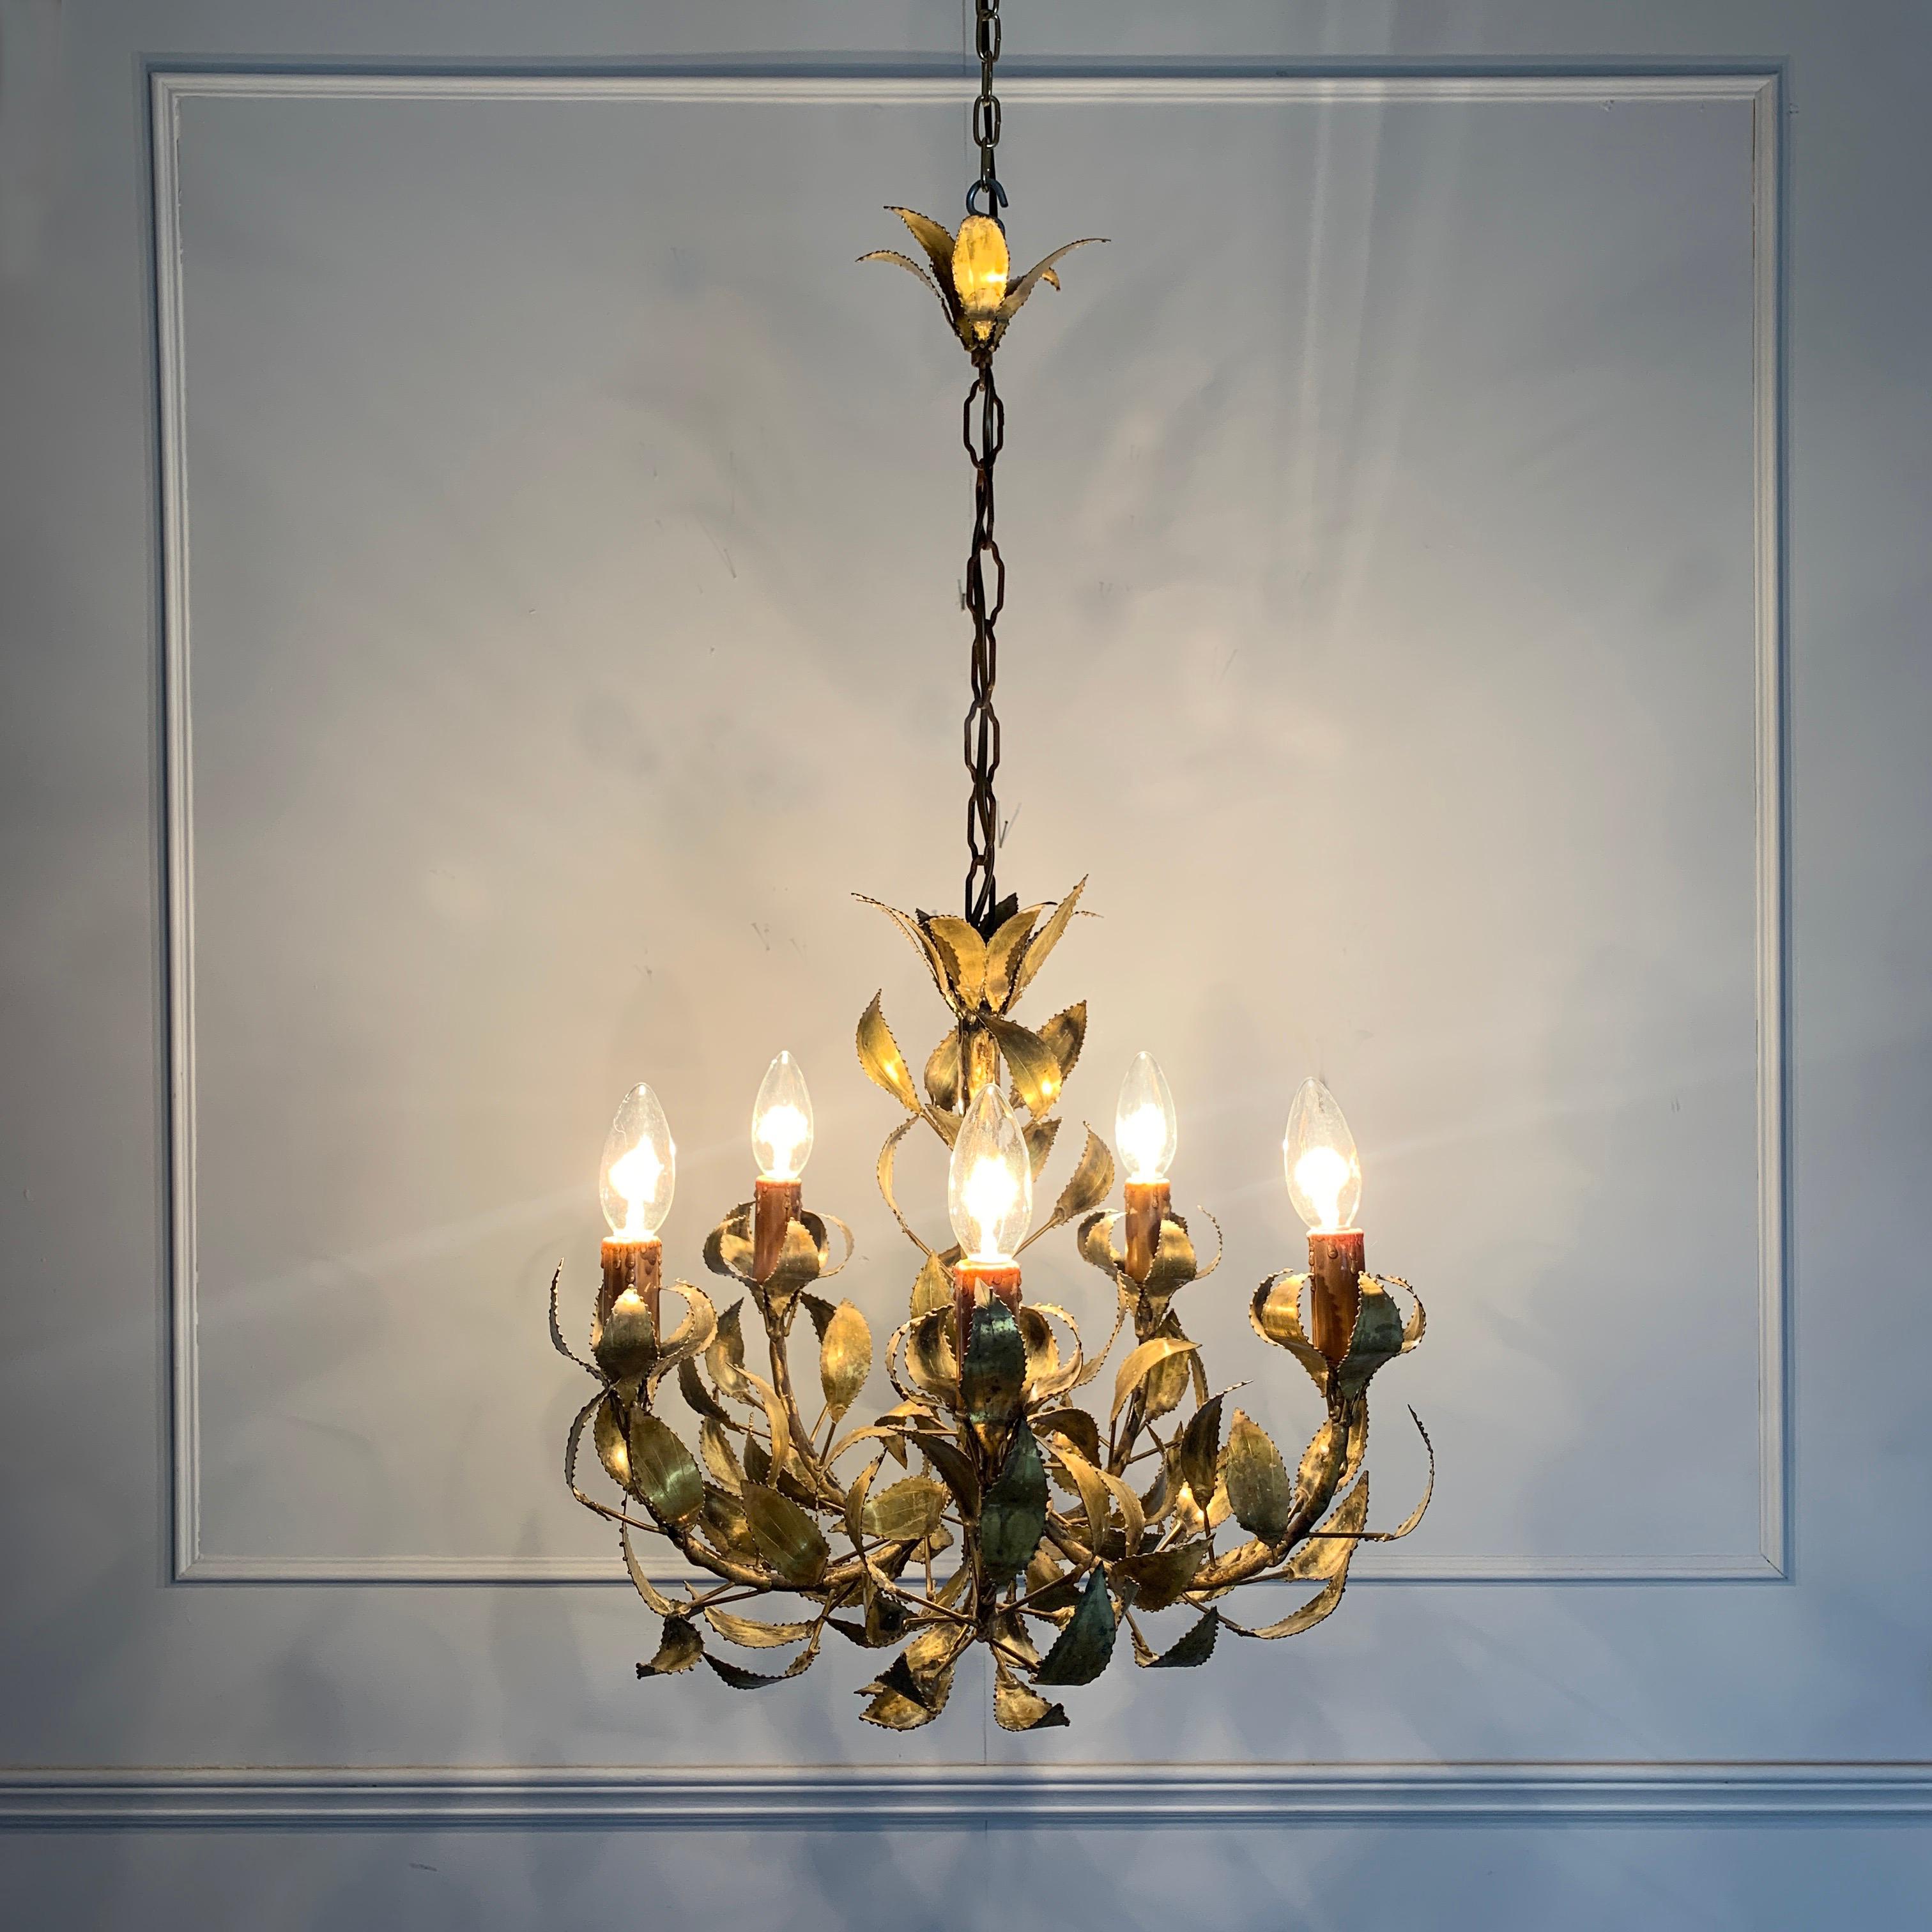 Rare Maison Jansen att handcrafted brass leaf chandelier
France, circa 1960s
Fabulous chandelier laden with the Classic handcut and burnished brass leaves of Maison Jansen
The main arm is flanked with multiple leaves 7 stems leading out to 5